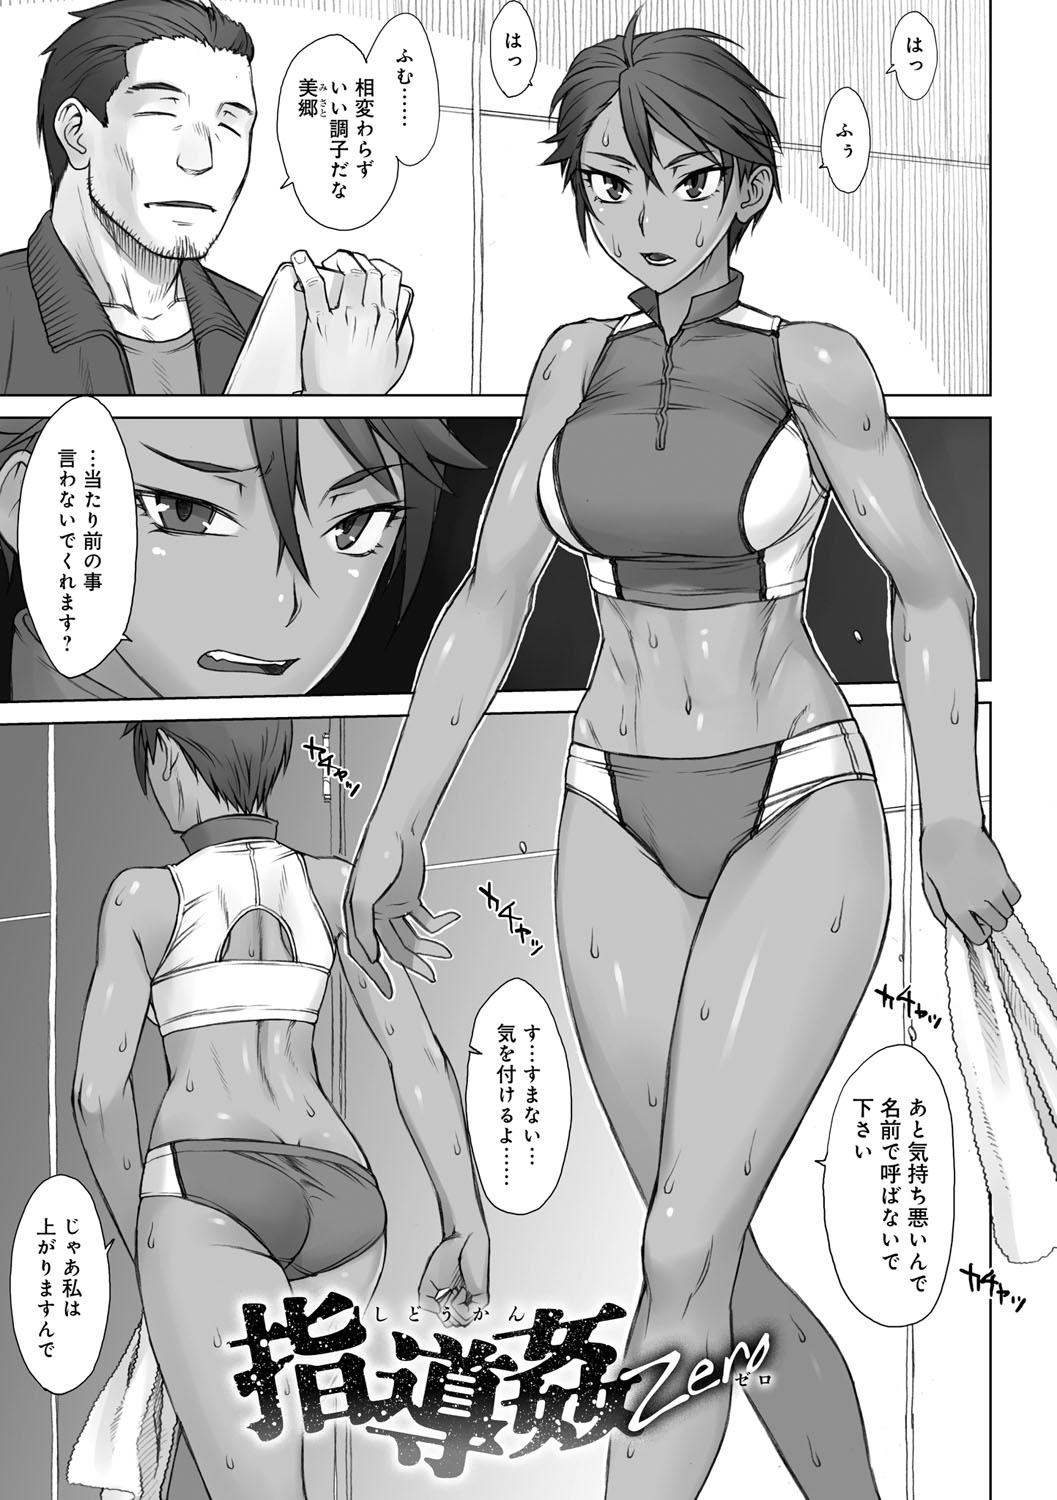 Shy Shidoukan Day after Asses - Page 6